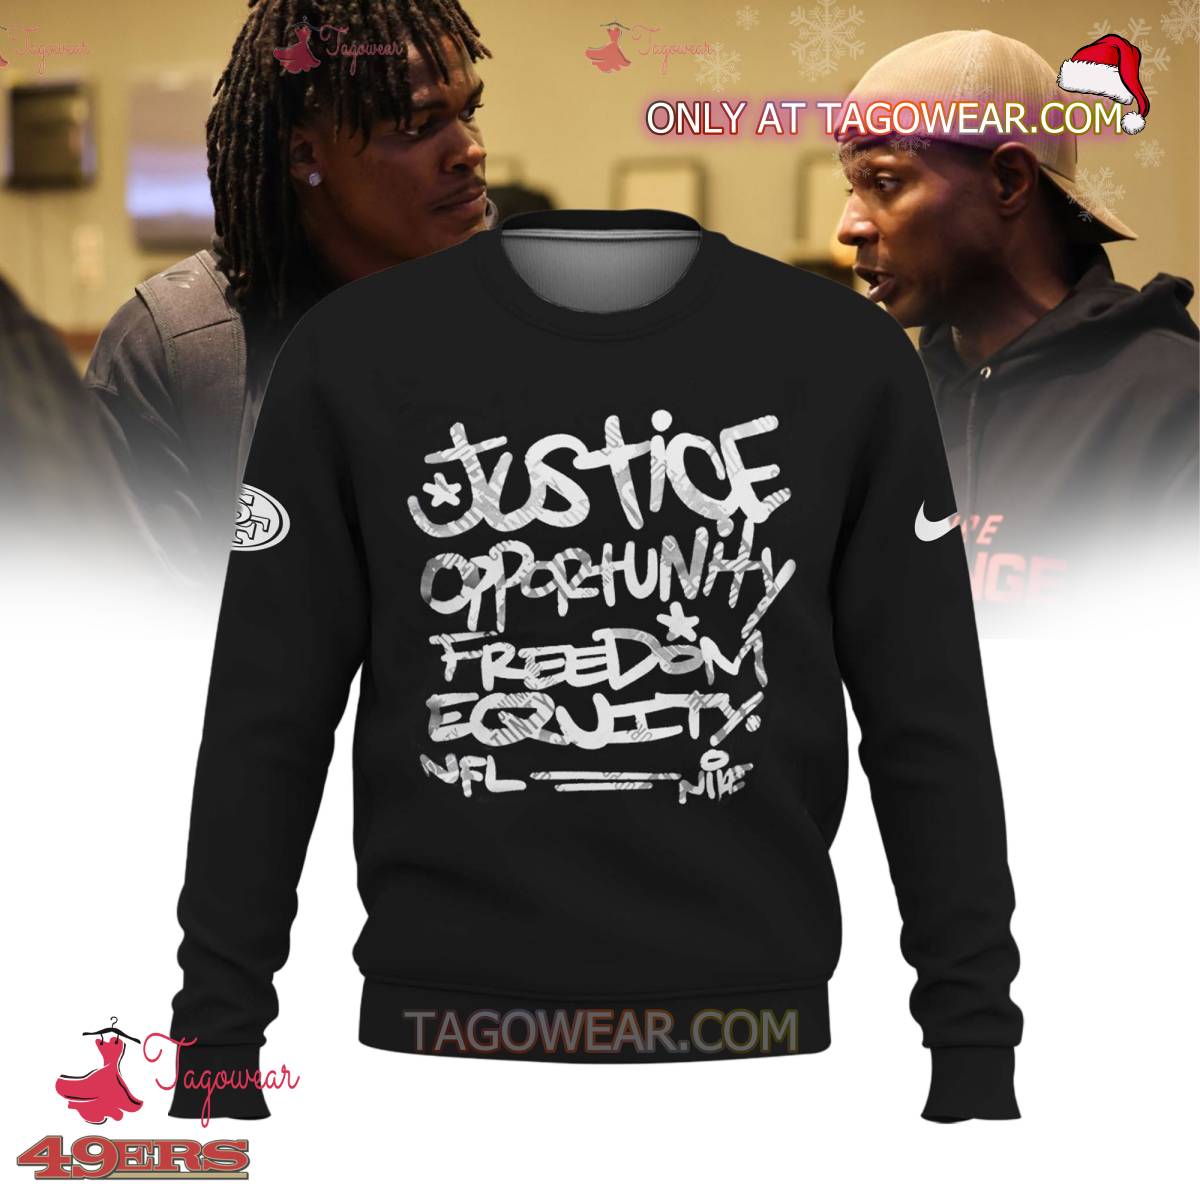 NFL San Francisco 49ers Inspire Change Justice Opportunity Equity Freedom Sweatshirt